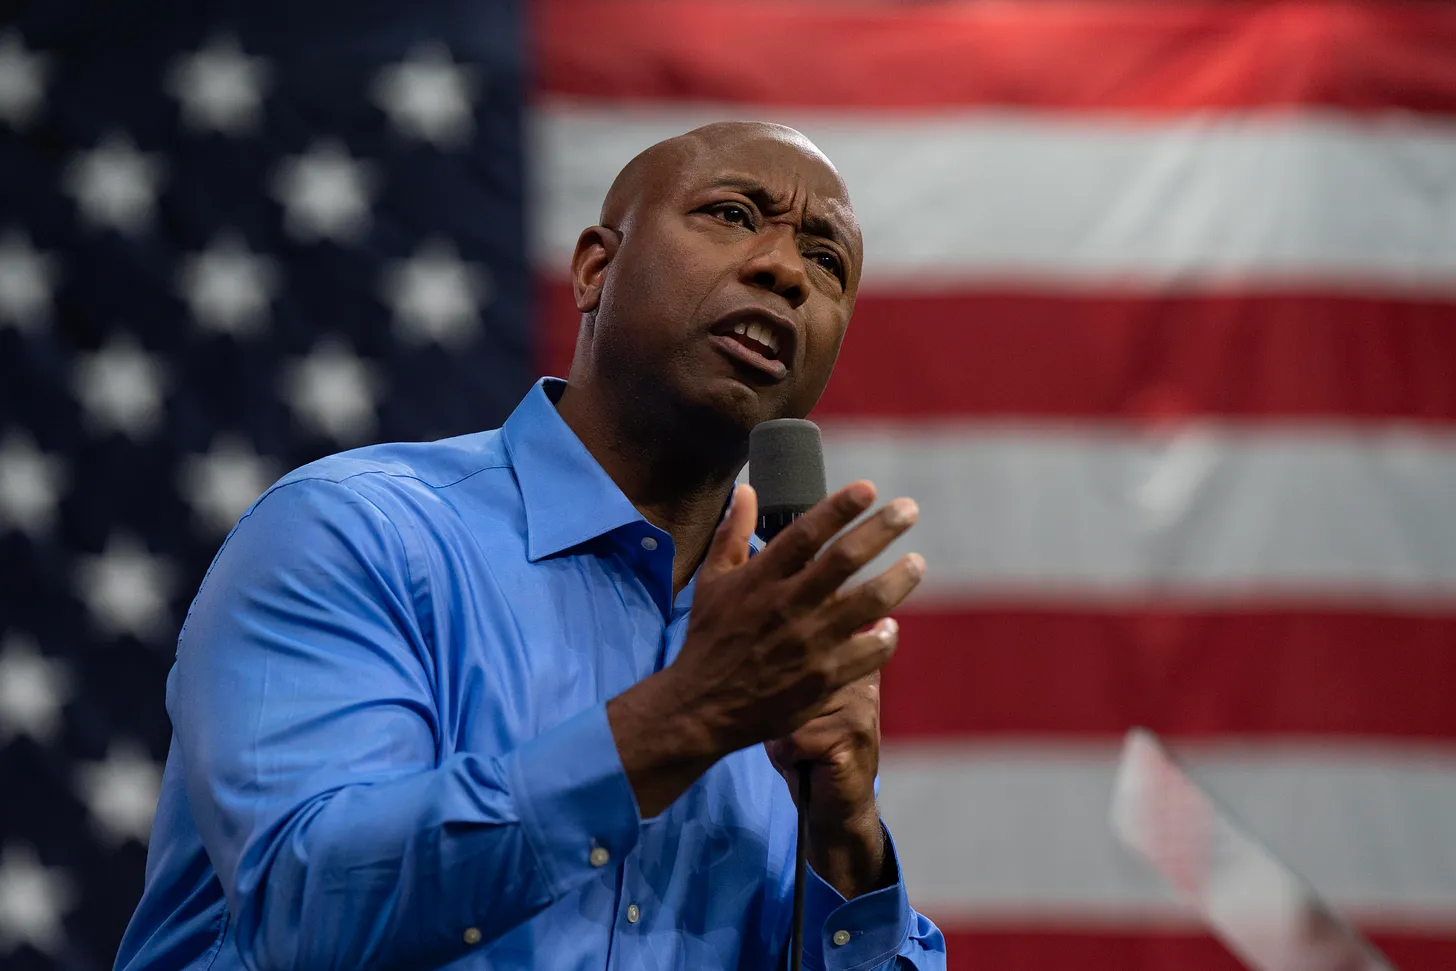 Why Not Tim Scott? Or: How much worse does DeSantis have to get before Republican elites abandon him? (thetriad.thebulwark.com)